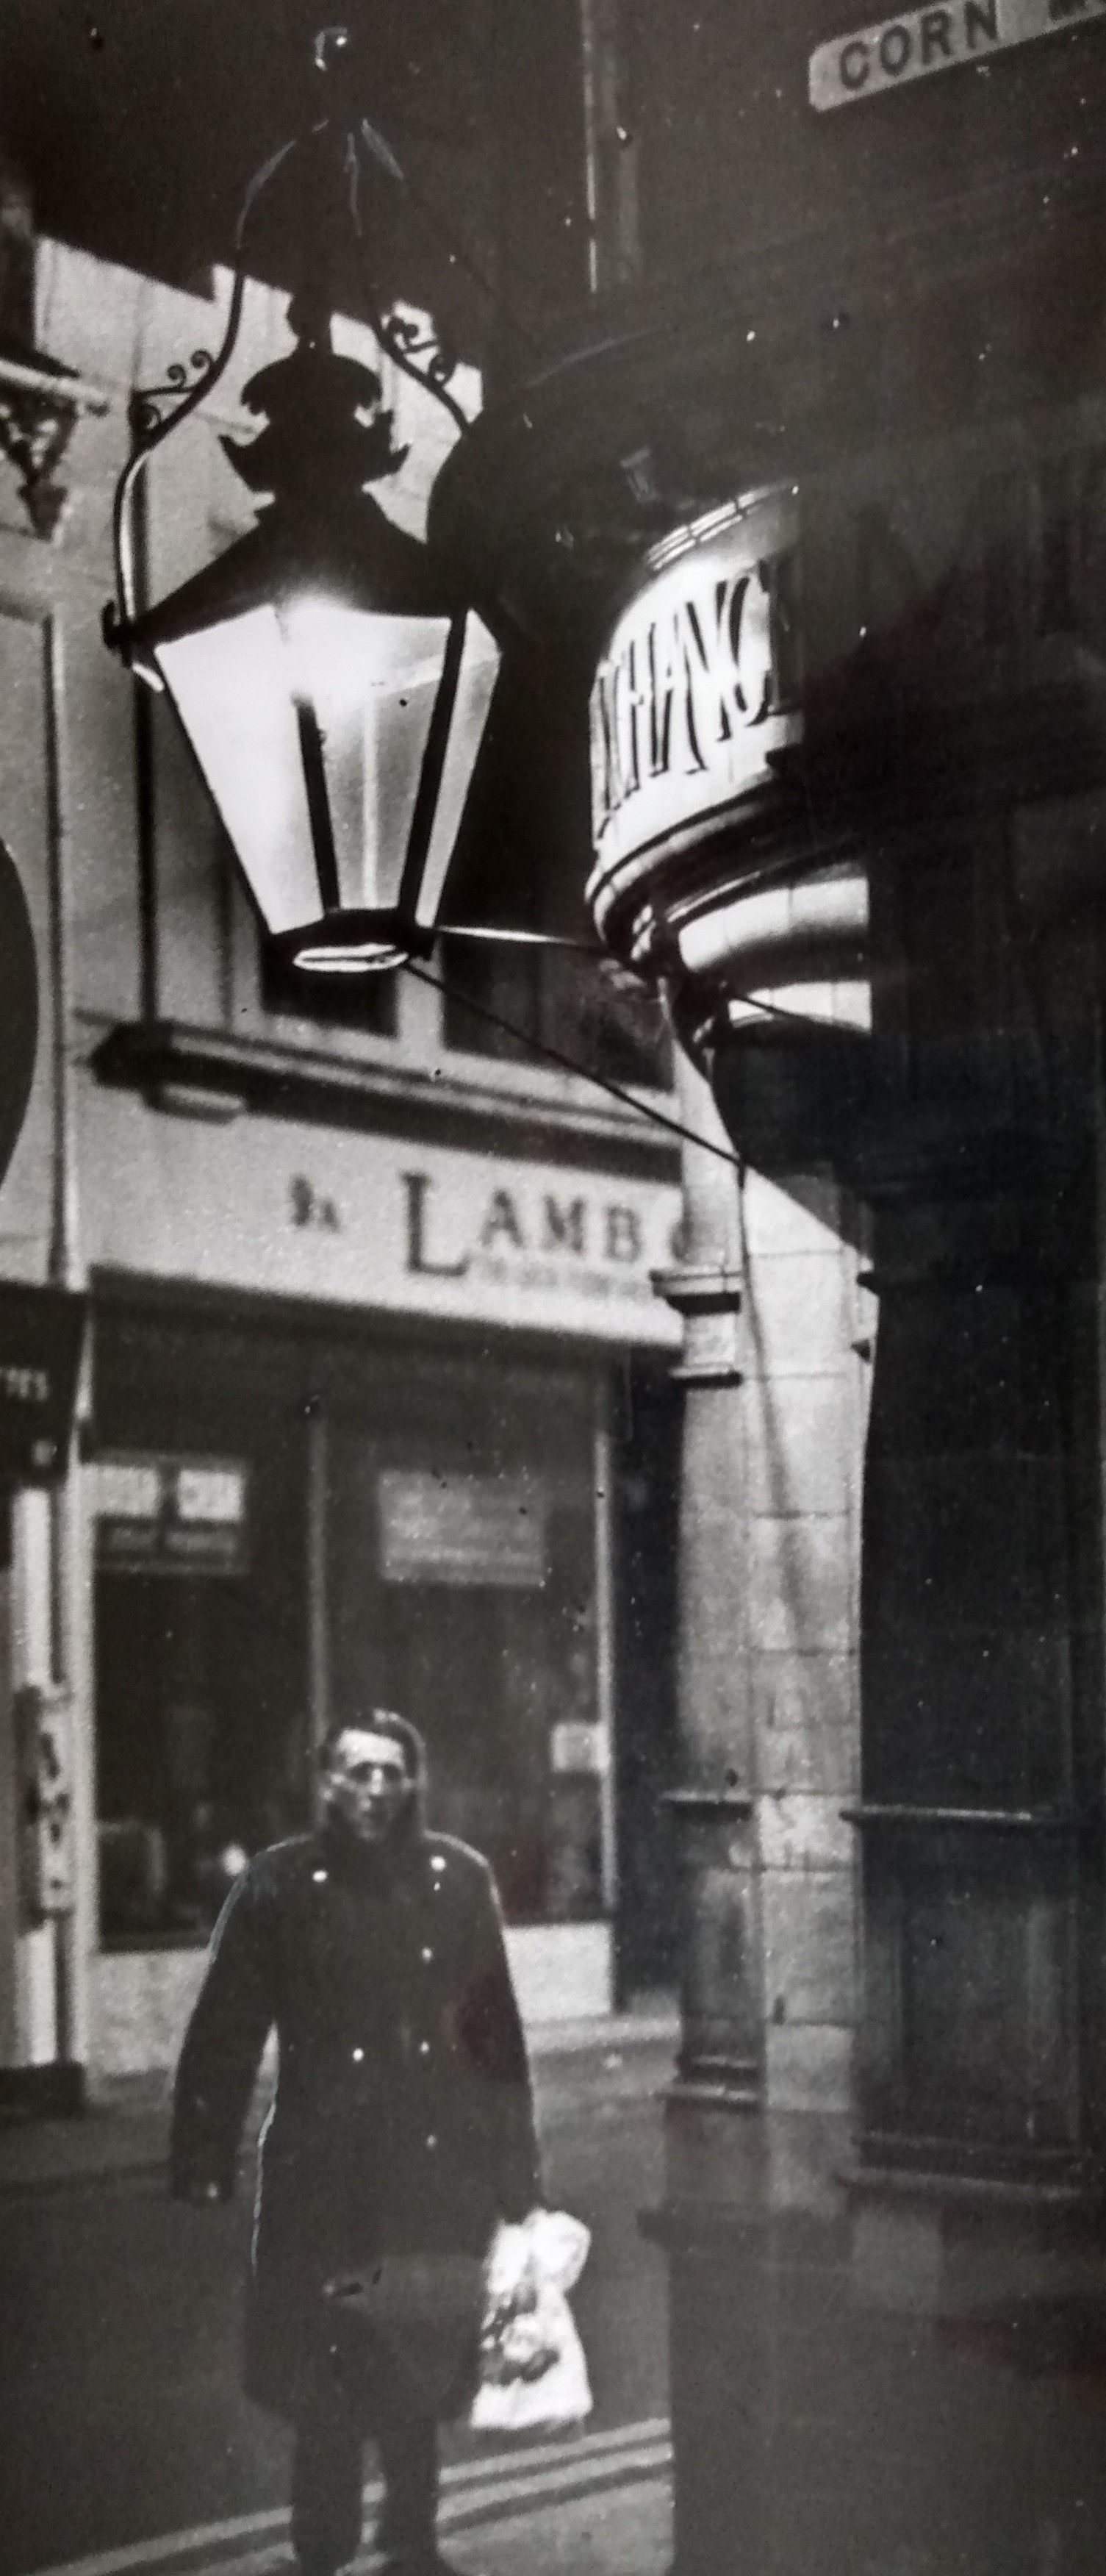 A moody and impressive, but sadly undated study of the lamp at the corner of the Cornmarket